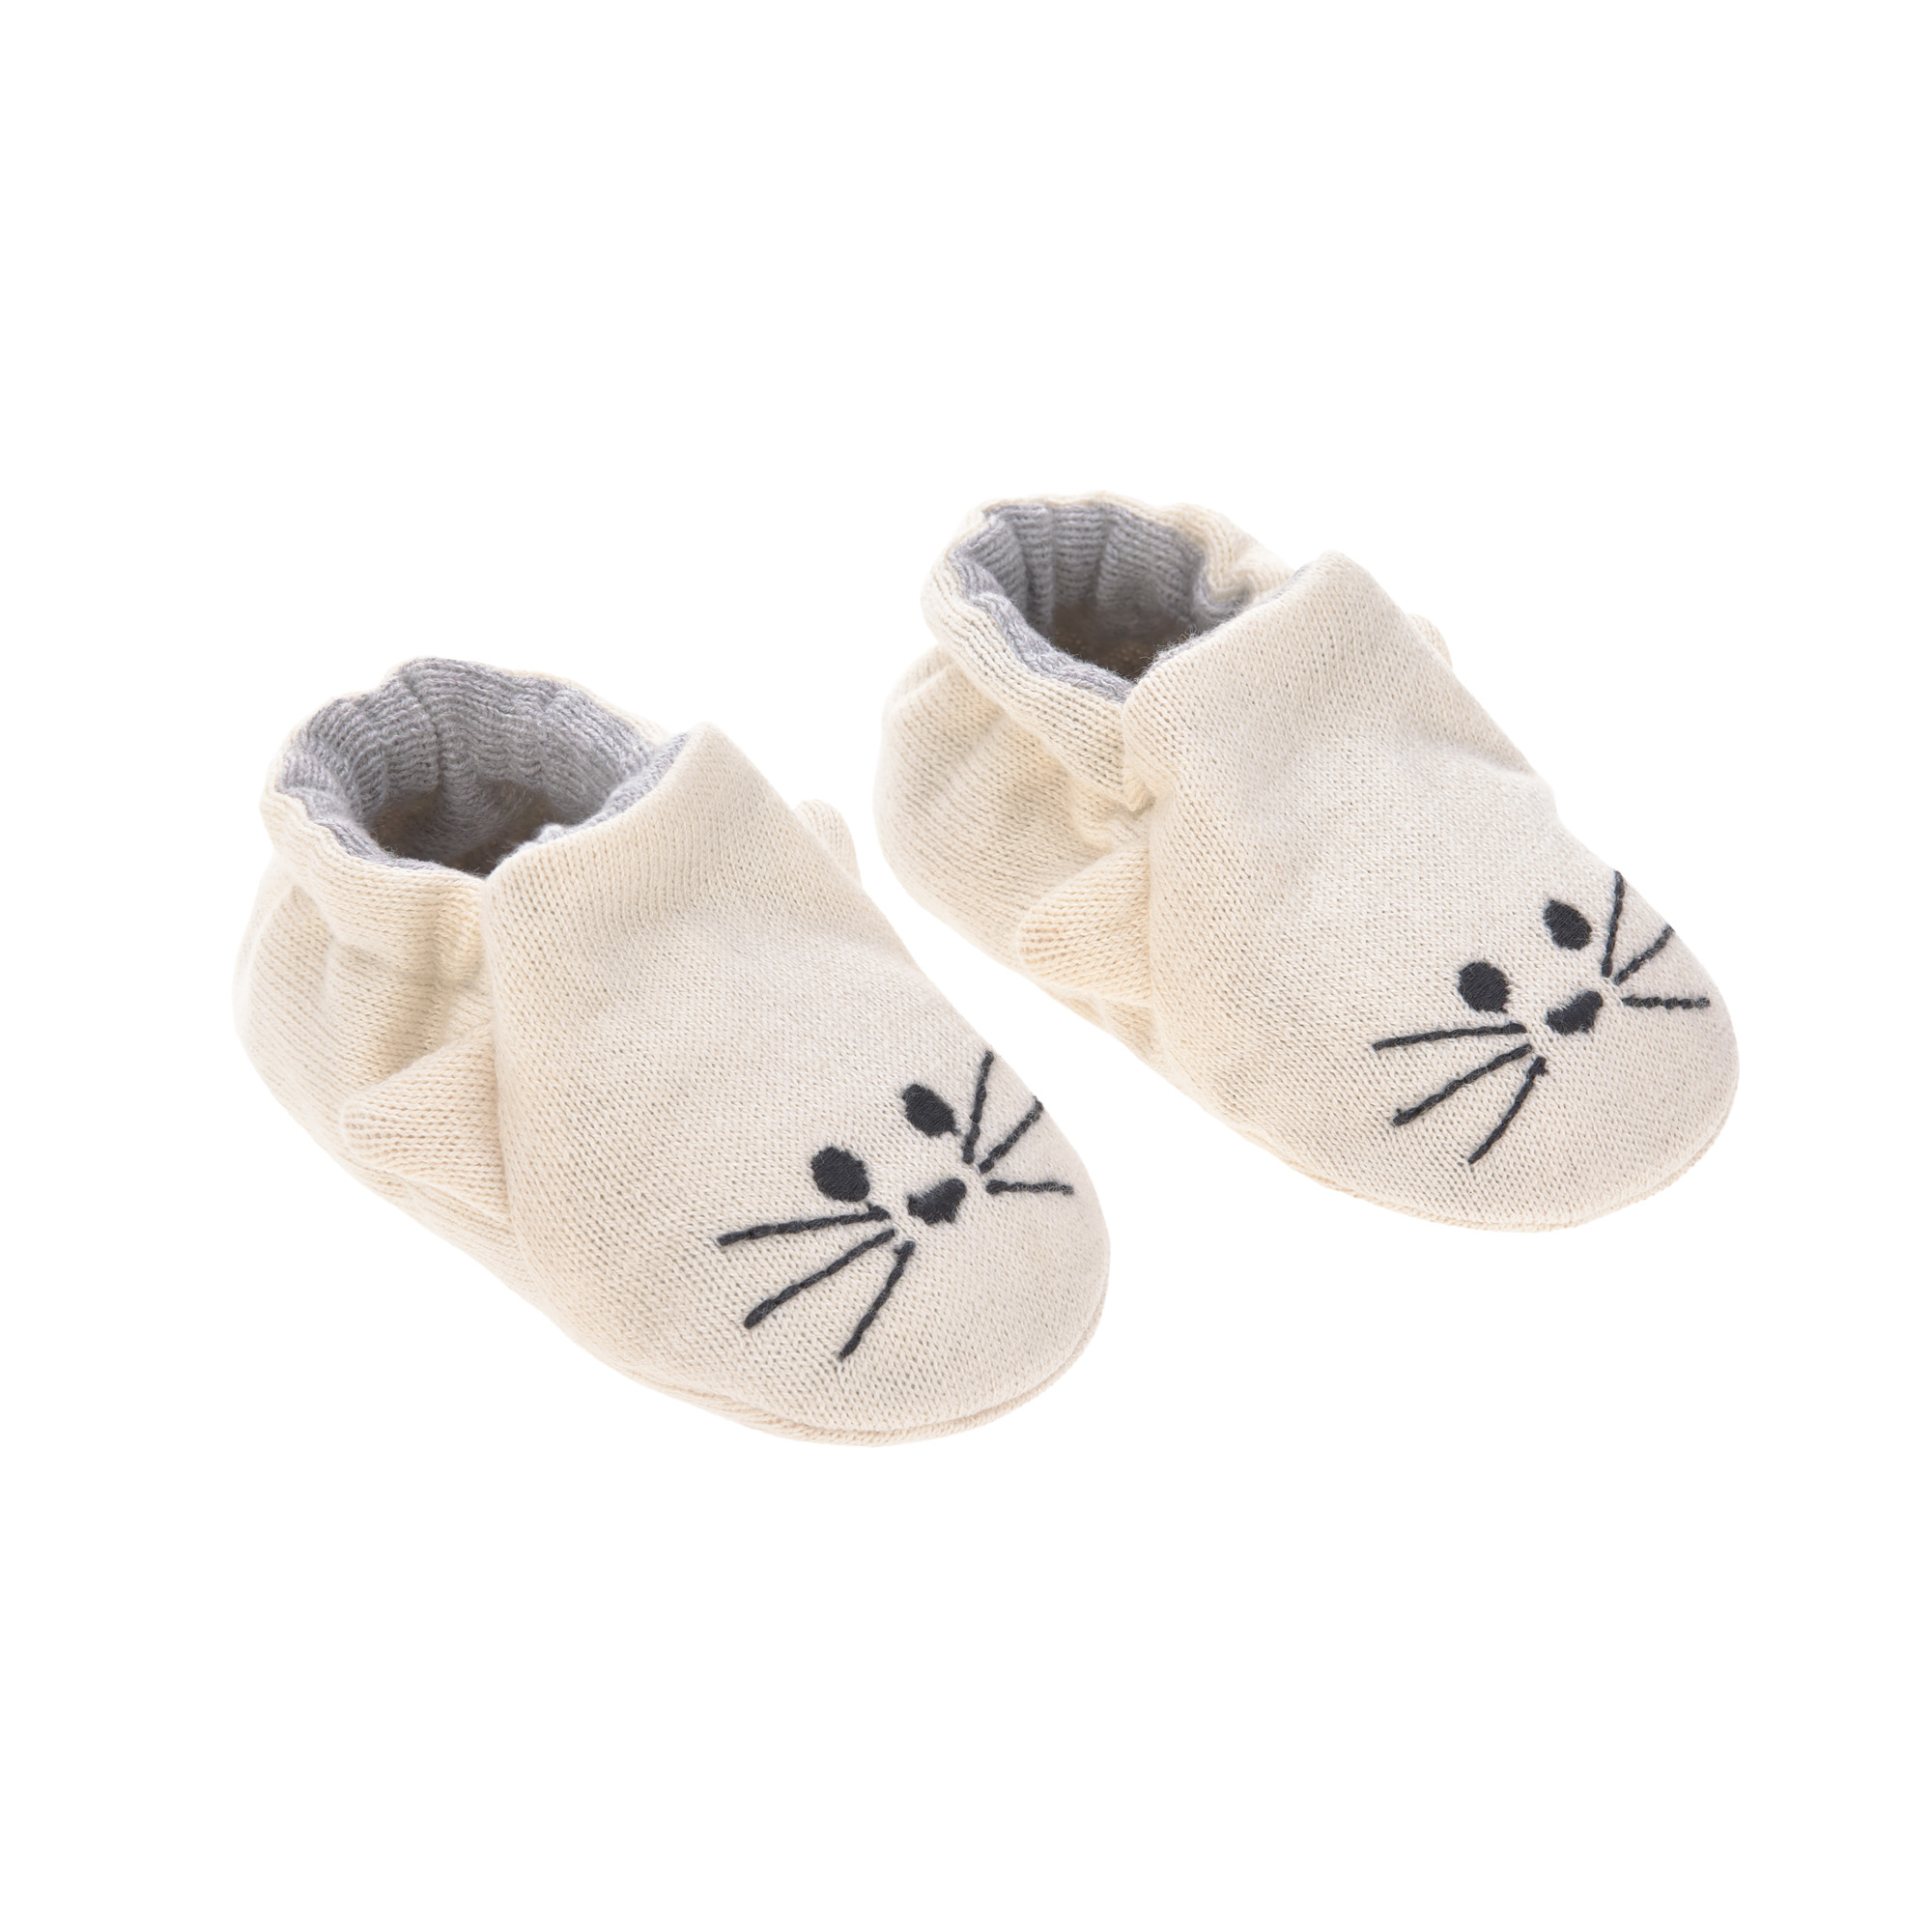 distributor in baby of - 4P Baby One bag GOTS Size, Cat Lässig kids products Little Chums 0-6 months, - Shoes cotton and